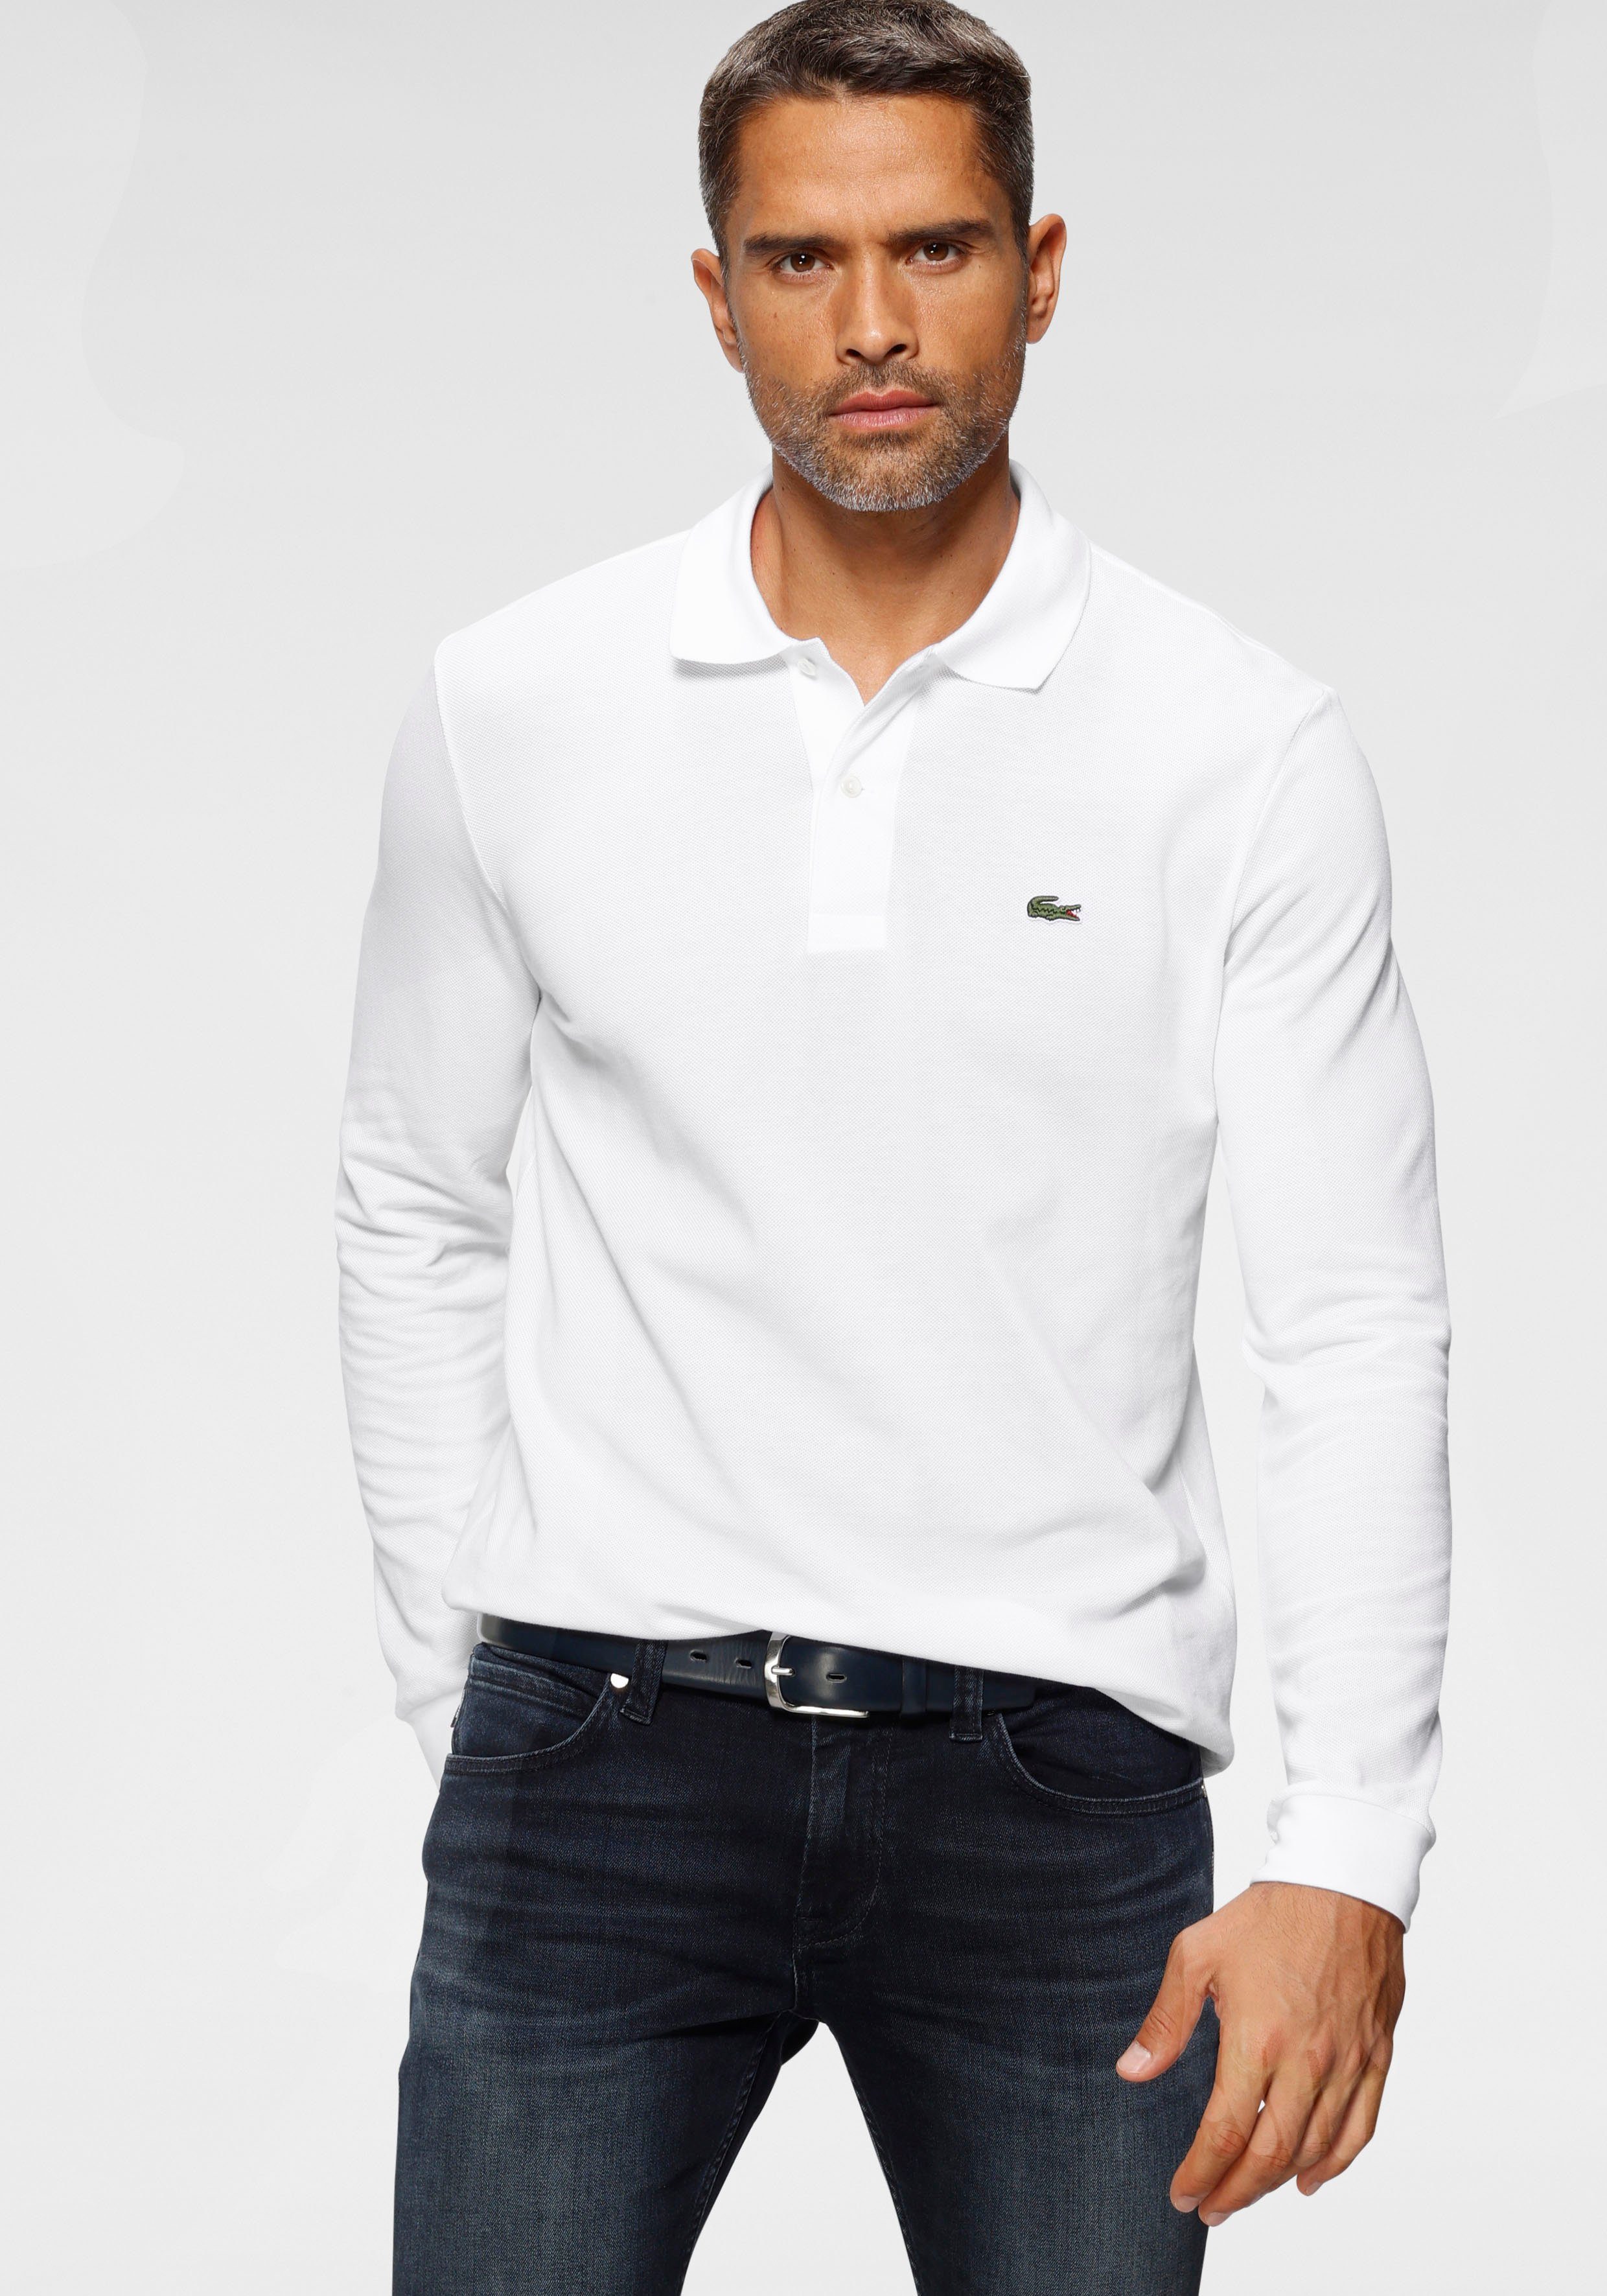 Lacoste Langarm-Poloshirt Basic Style, Material: Obermaterial: 94%  Baumwolle, 6% Elasthan